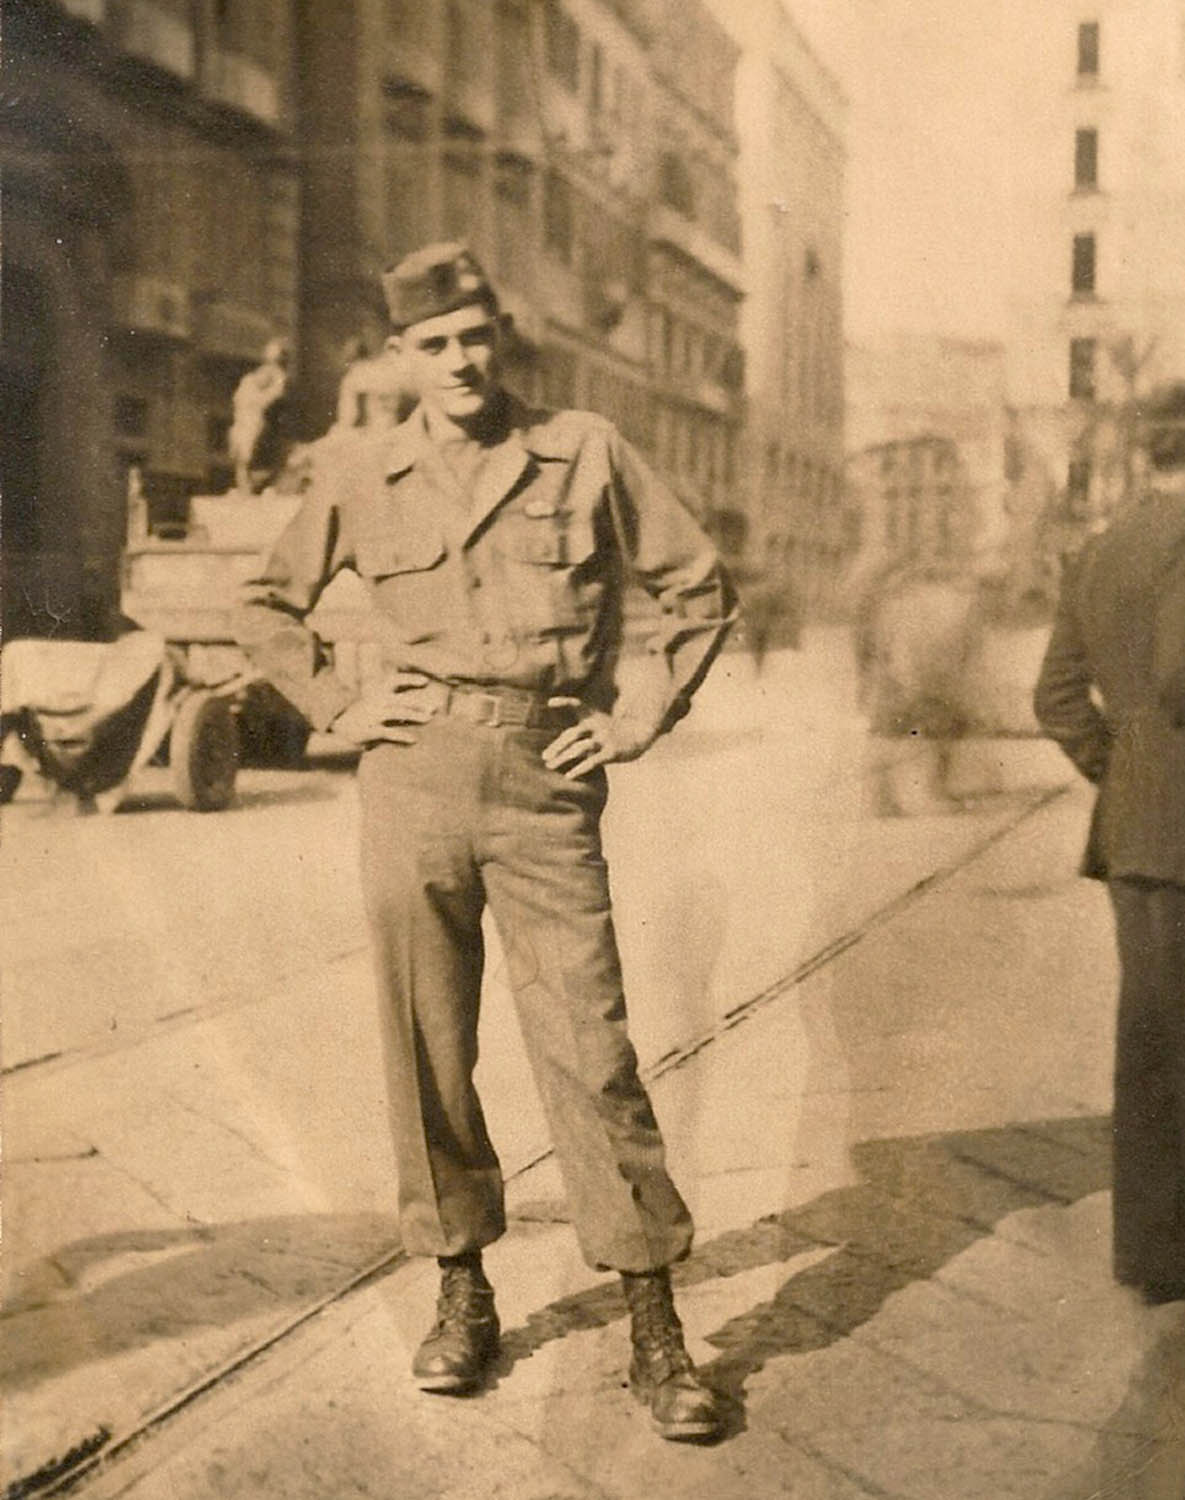 Pfc. Rodier in Italy 1943.